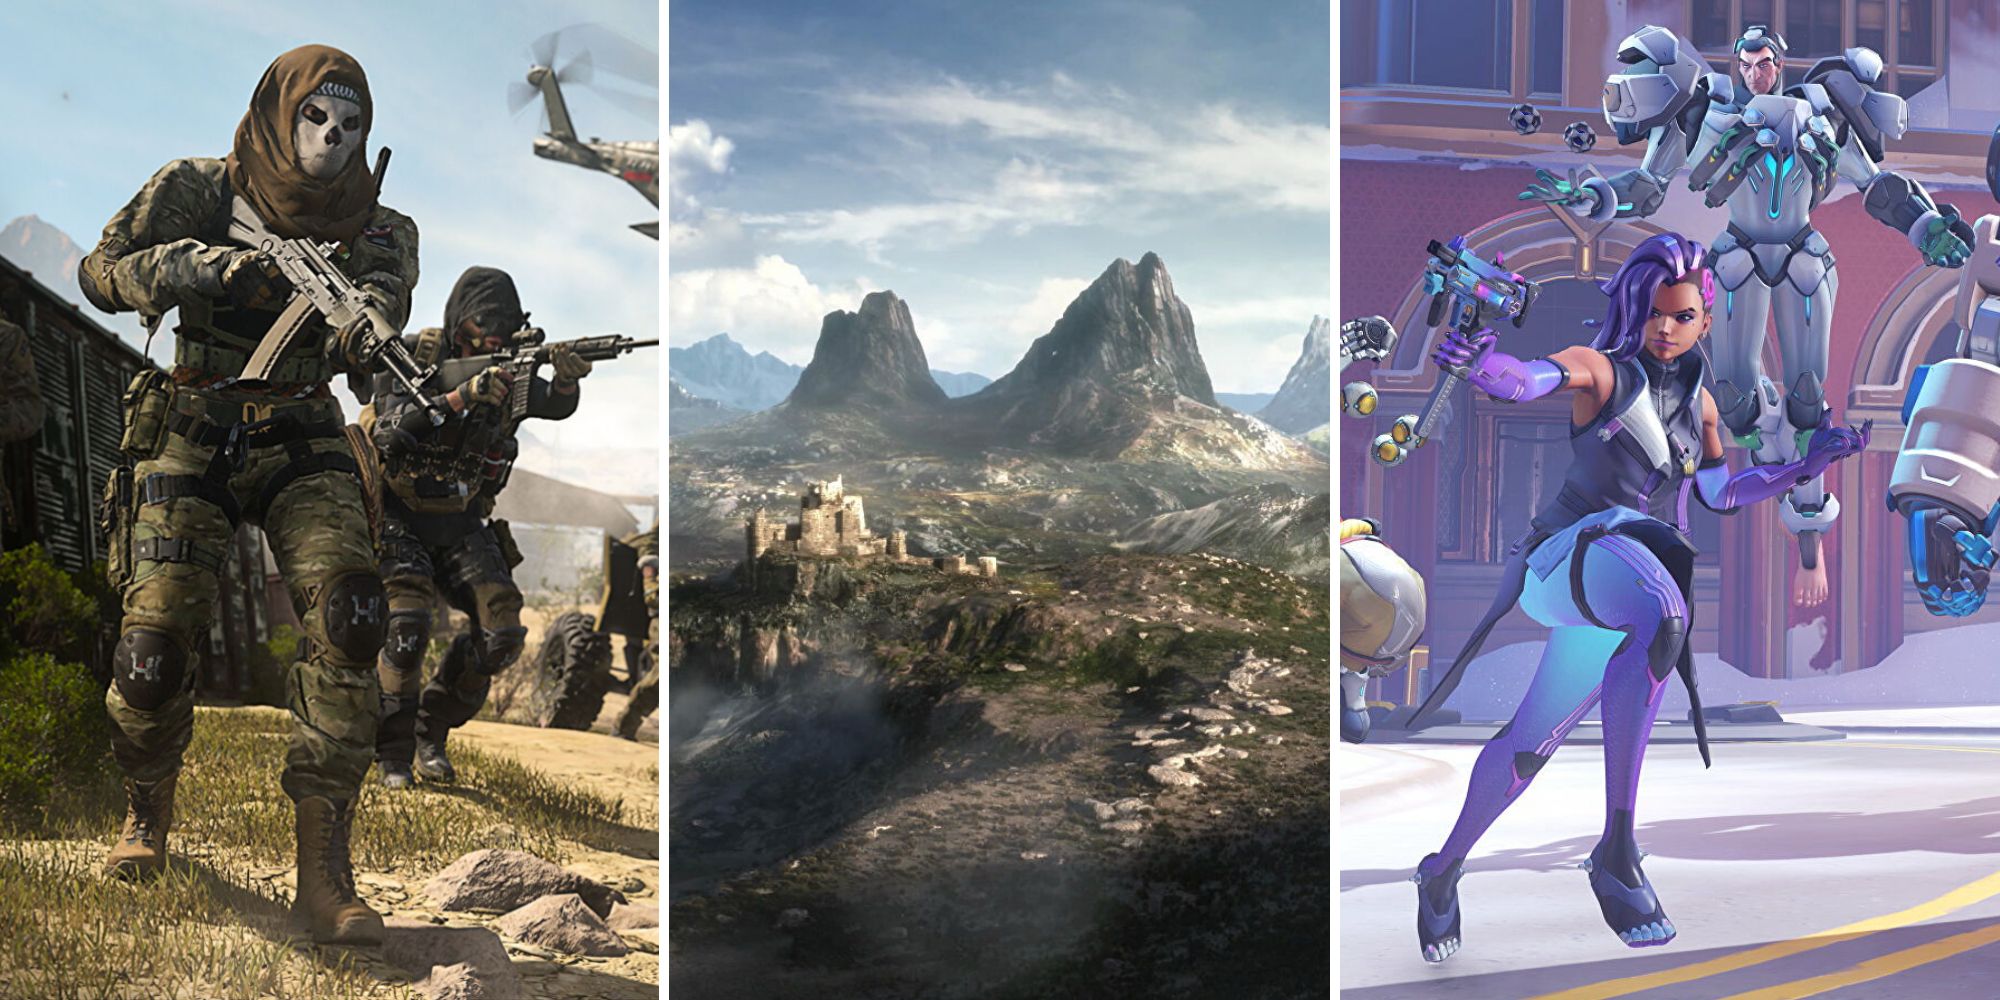 Soldiers from Modern Warfare 2, mountains from the Elder Scrolls 6, and Sombra and Sigma from Overwatch 2